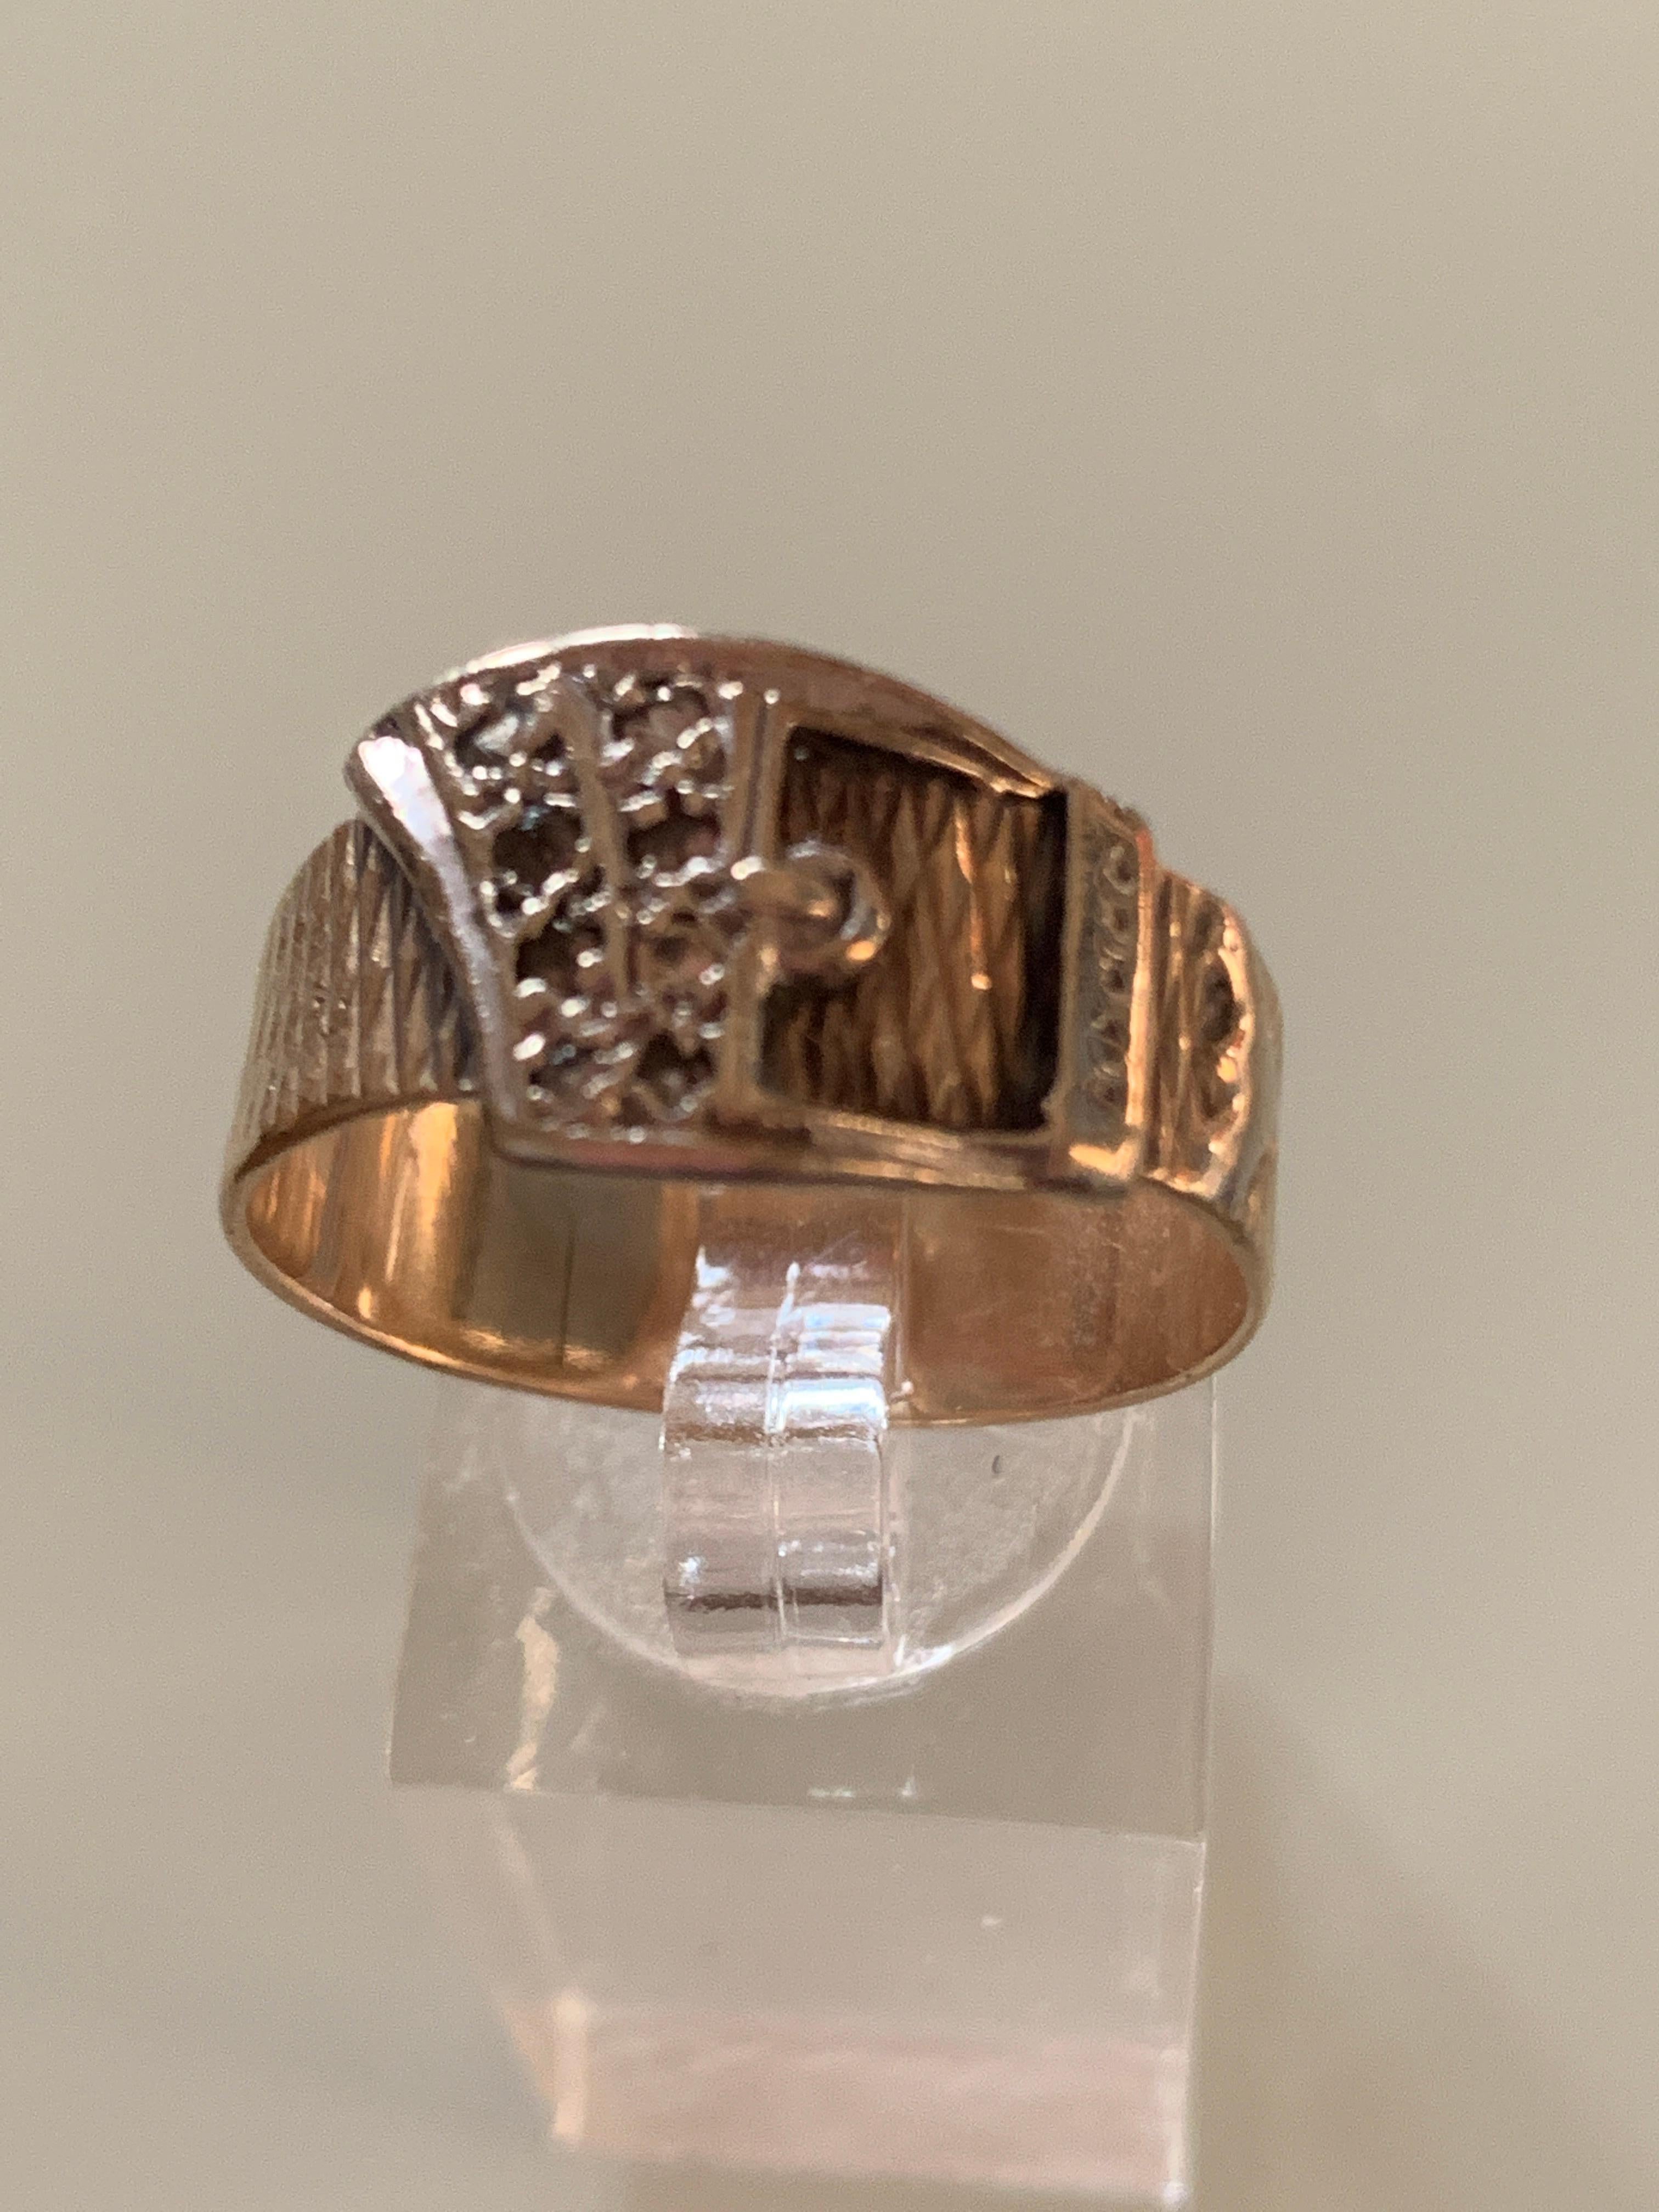 9ct 375 Gold Pave Diamond Buckle Ring 
Size U.K - V
        U.S -  10 5/8
Weight 4.42 grams
By Goldsmiths Fred Manshaw
Dated London 1964